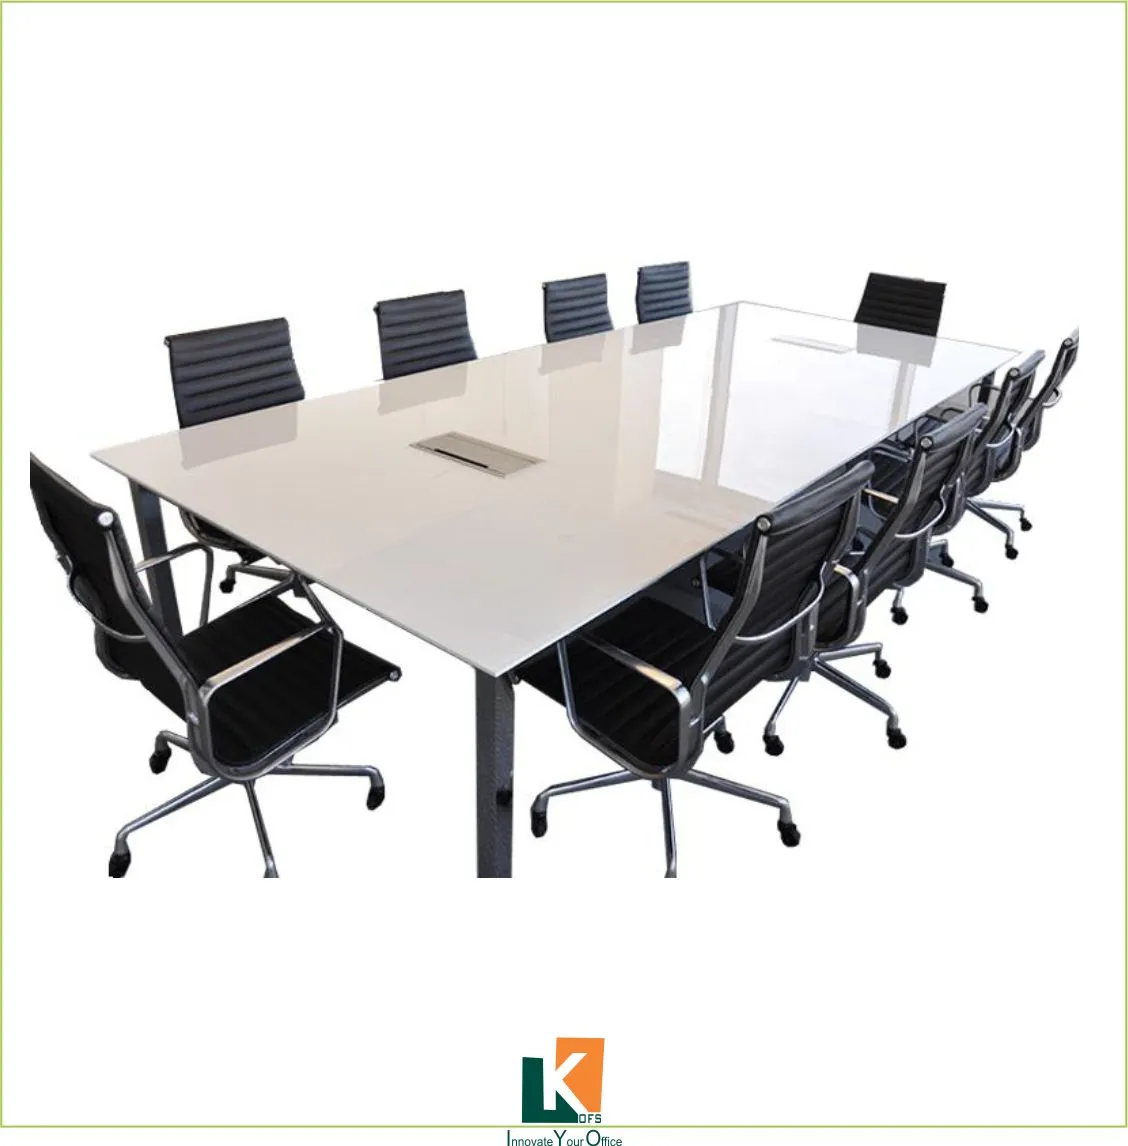 Modular conference table